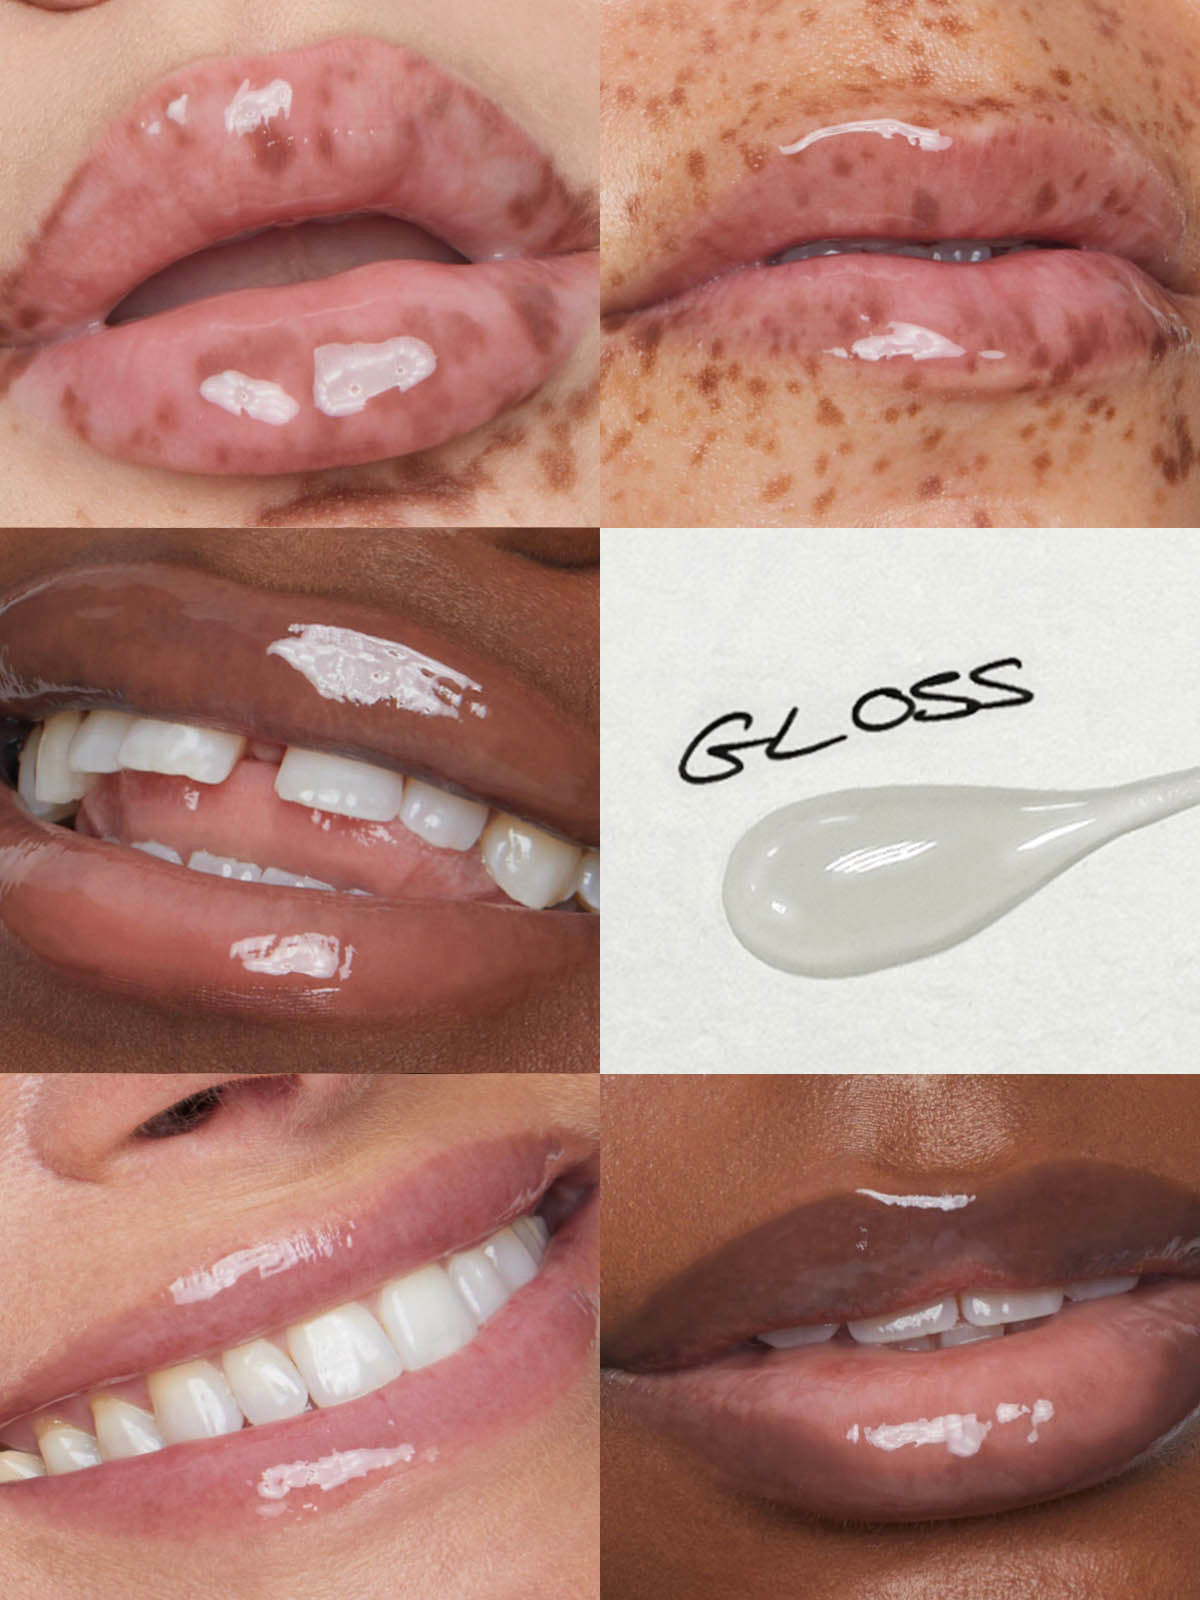 GRID OF REFY LIP GLOSS CLEAR ON DIFFERENT SKIN TONES